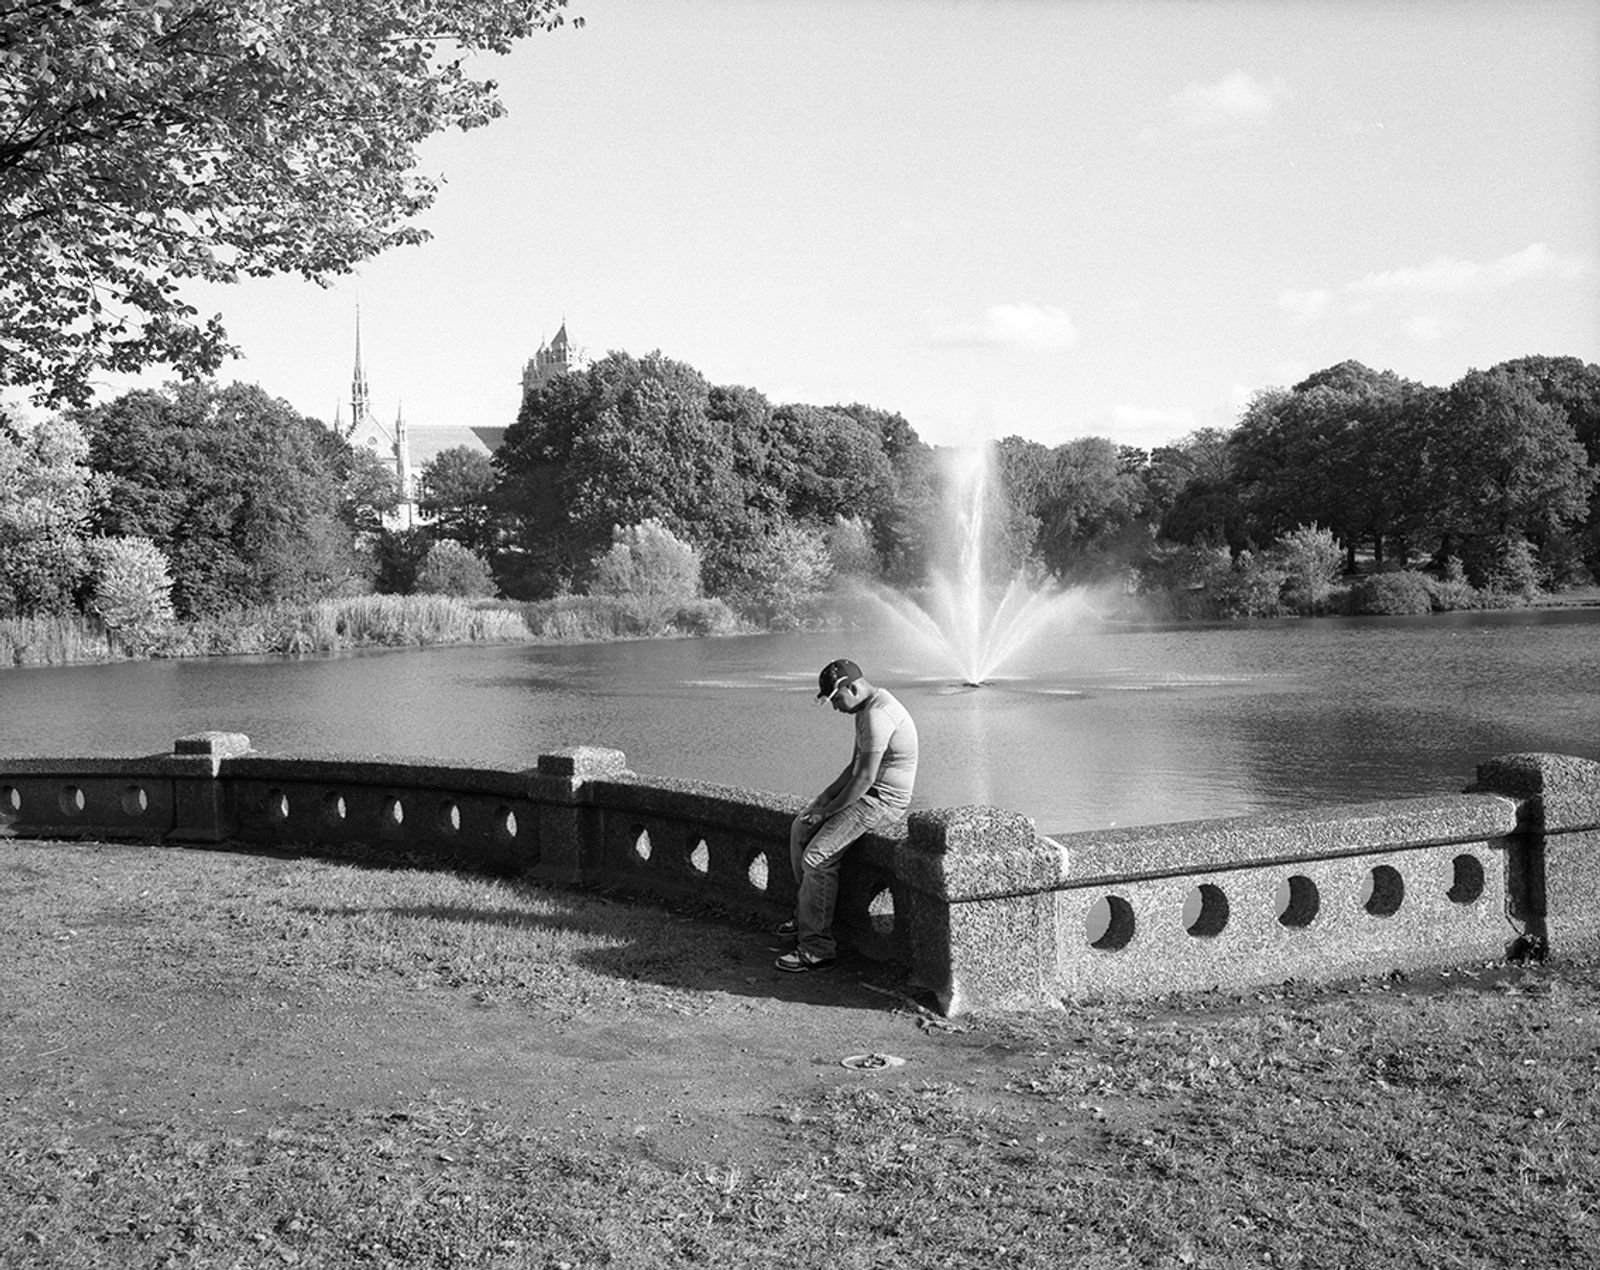 © Nicholas Pollack - Man and fountain, Branch Brook Park, Newark, New Jersey, 2014. Scan of 6x7 film negative.